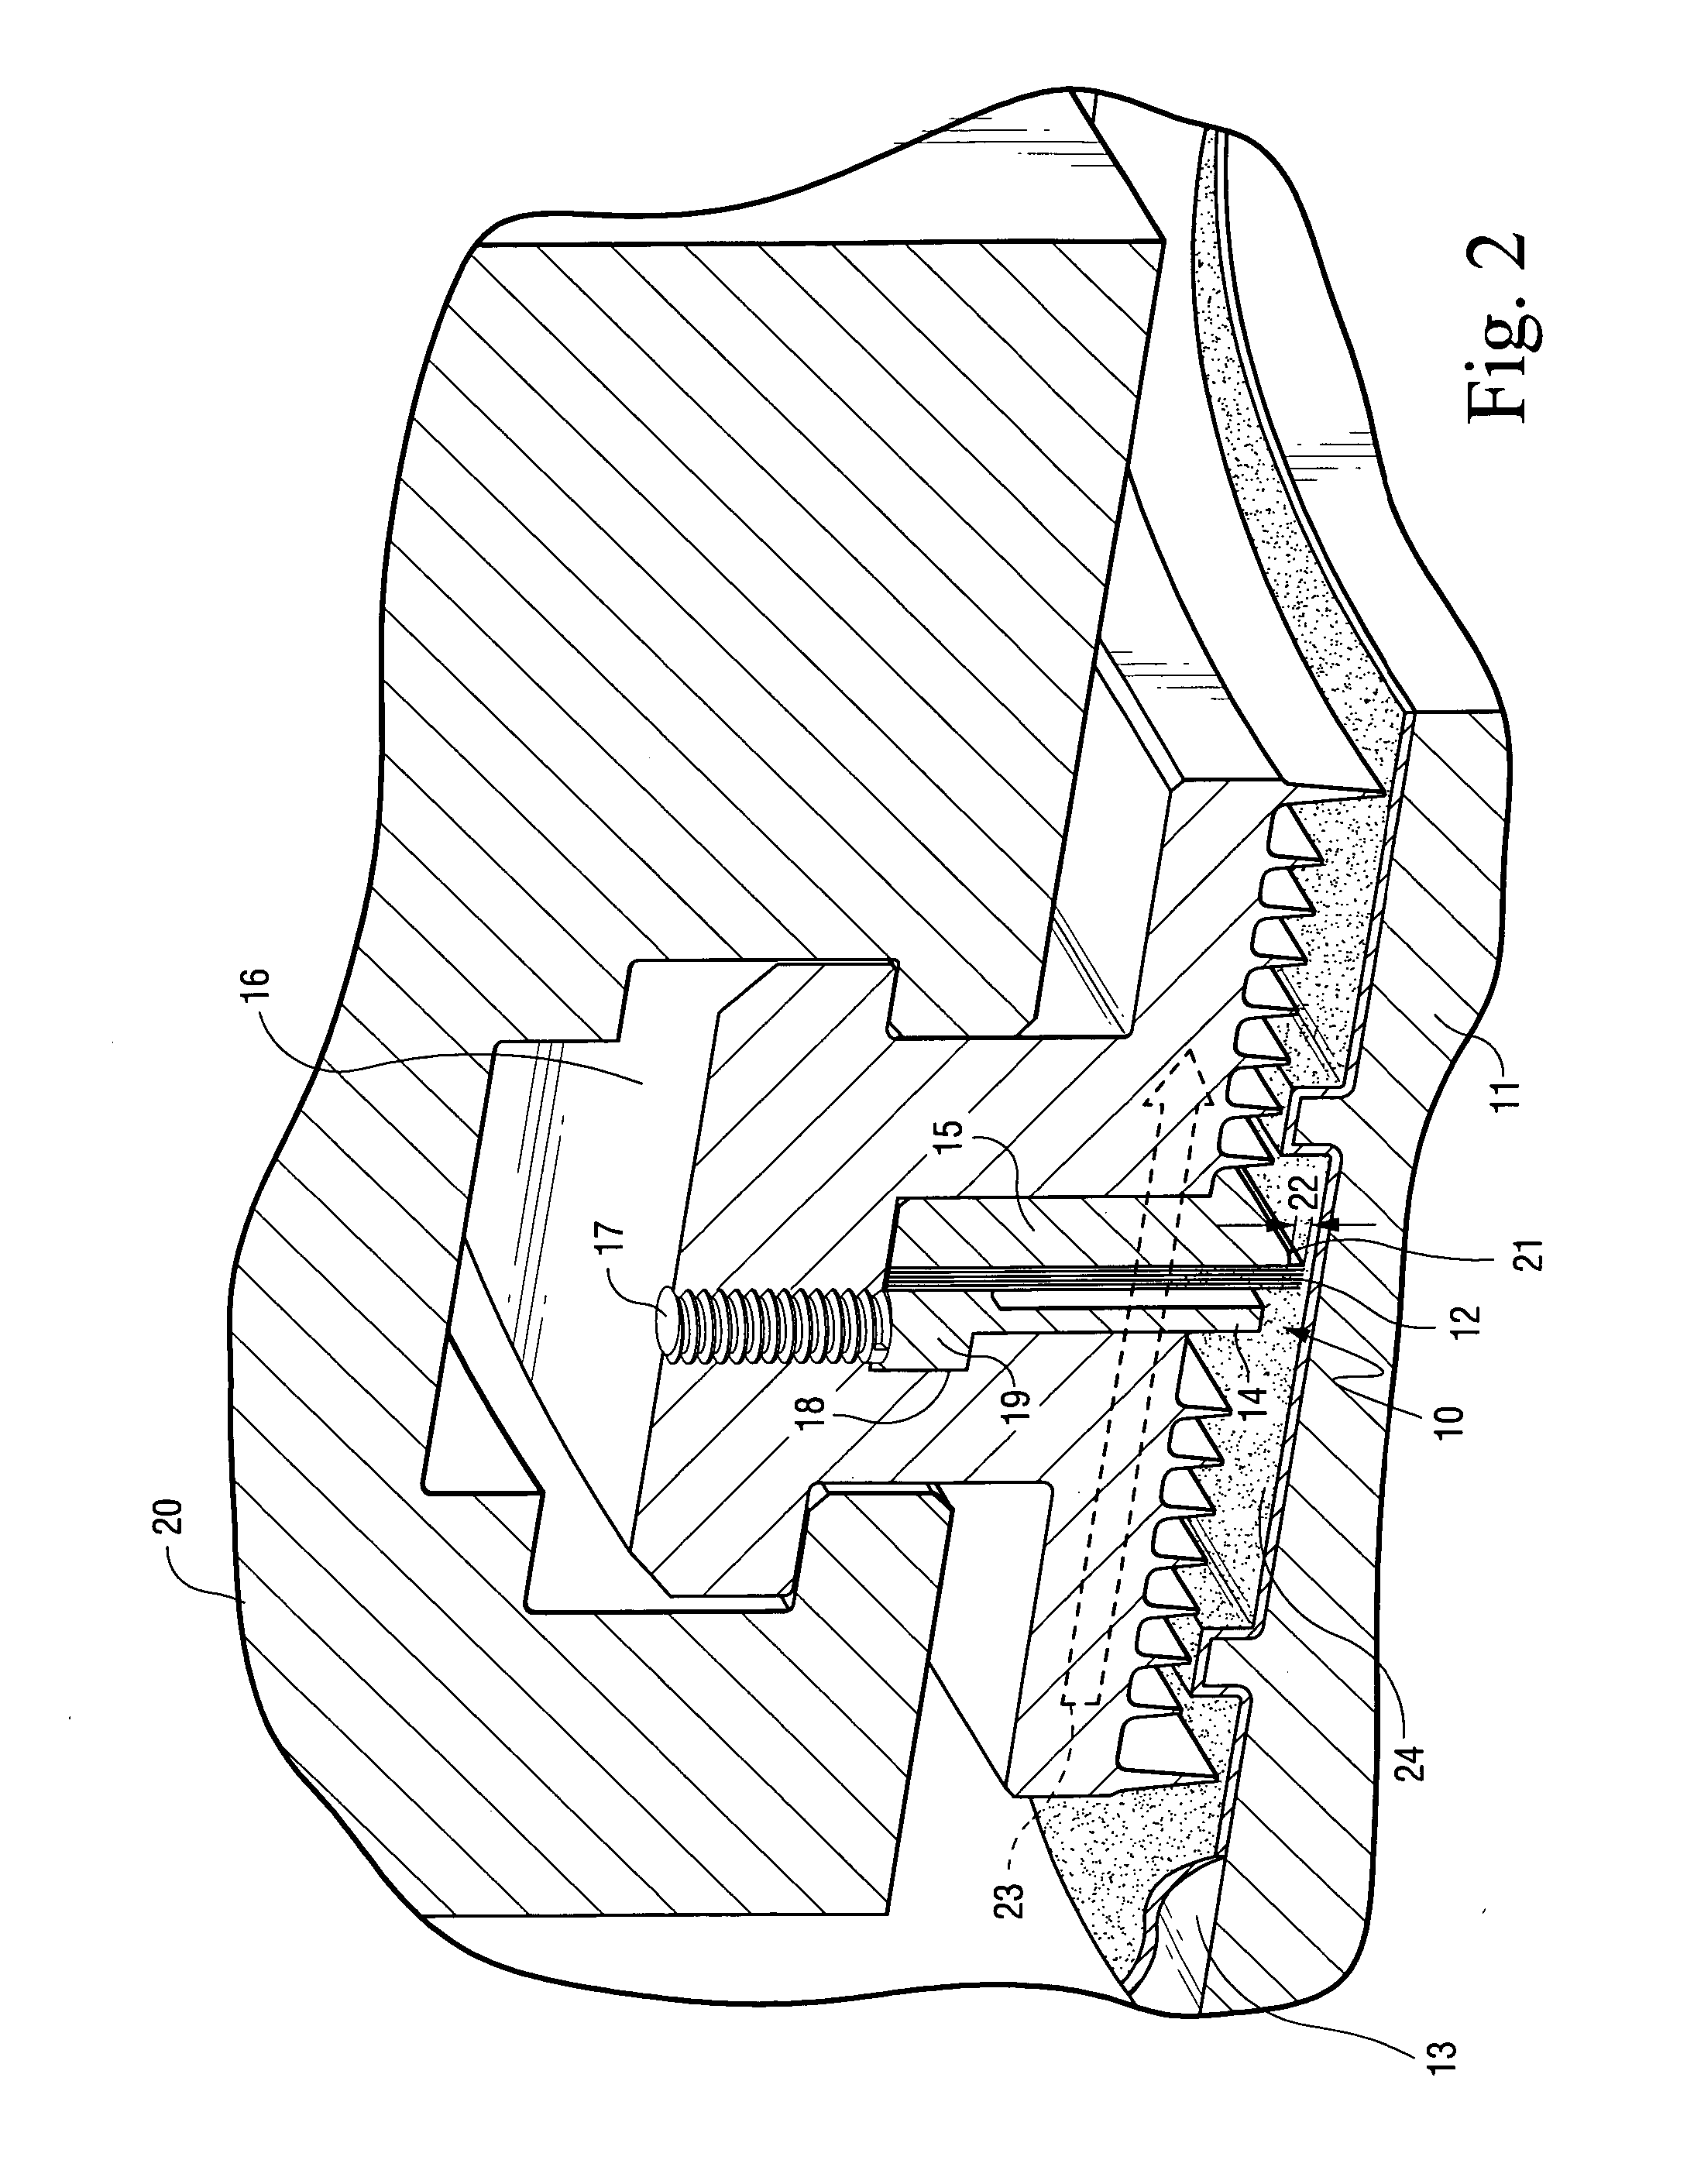 Abradable and/or abrasive coating and brush seal configuration